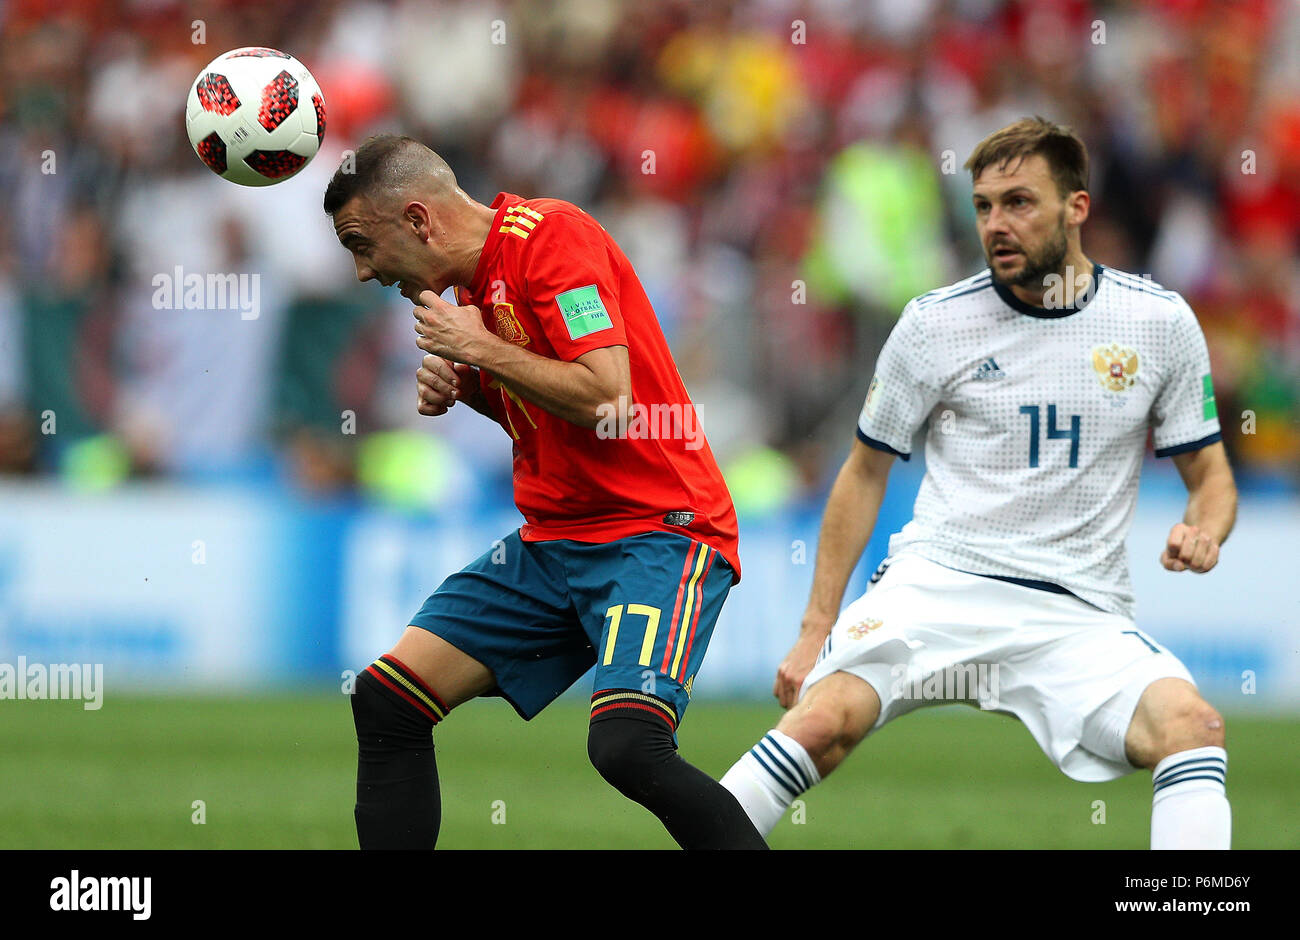 Moscow, Russia. 1st July, 2018.  Iago ASPAS of Spain and Vladimir GRANAT of Russia during the match between Spain and Russia, valid for the eighth-finals of the 2018 World Cup held at the Luzhniki Stadium in Moscow, Russia. (Photo: Rodolfo Buhrer/La Imagem/Fotoarena) Credit: Foto Arena LTDA/Alamy Live News Stock Photo